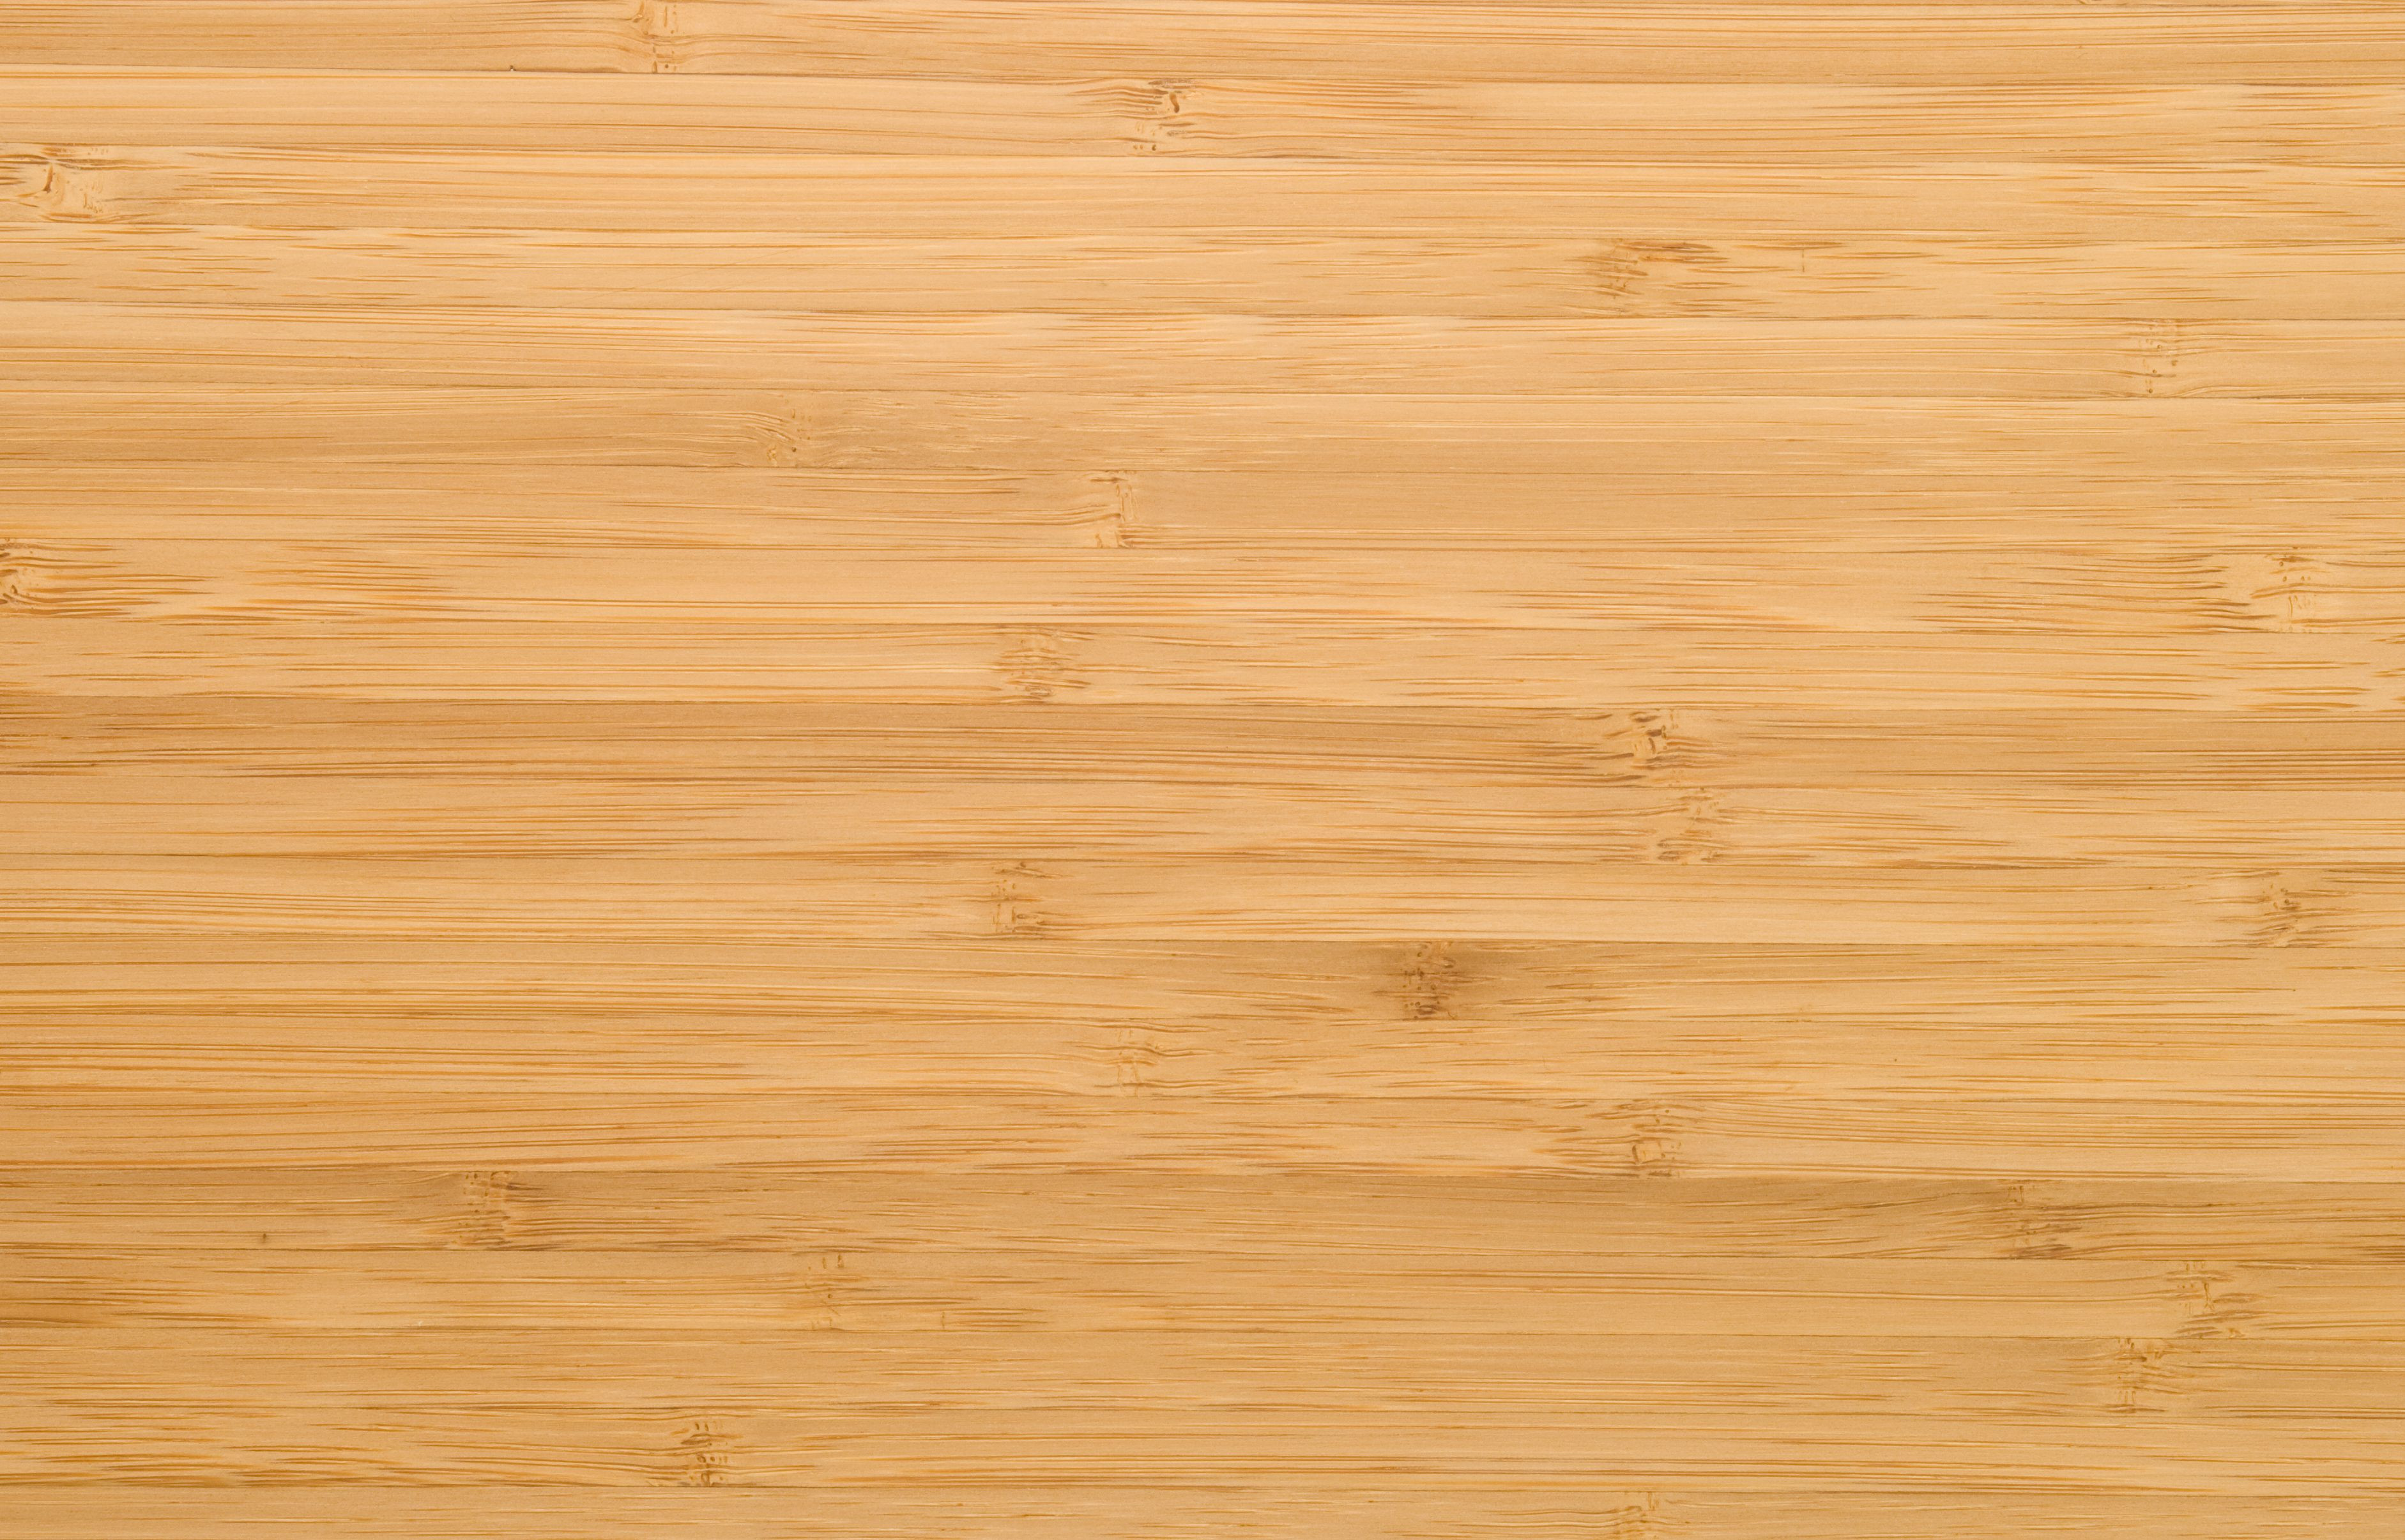 17 Recommended Professional Hardwood Floor Cleaning Cost 2024 free download professional hardwood floor cleaning cost of can you use a wet mop on bamboo floors for natural bamboo plank 94259870 59aeefd4519de20010d5c648